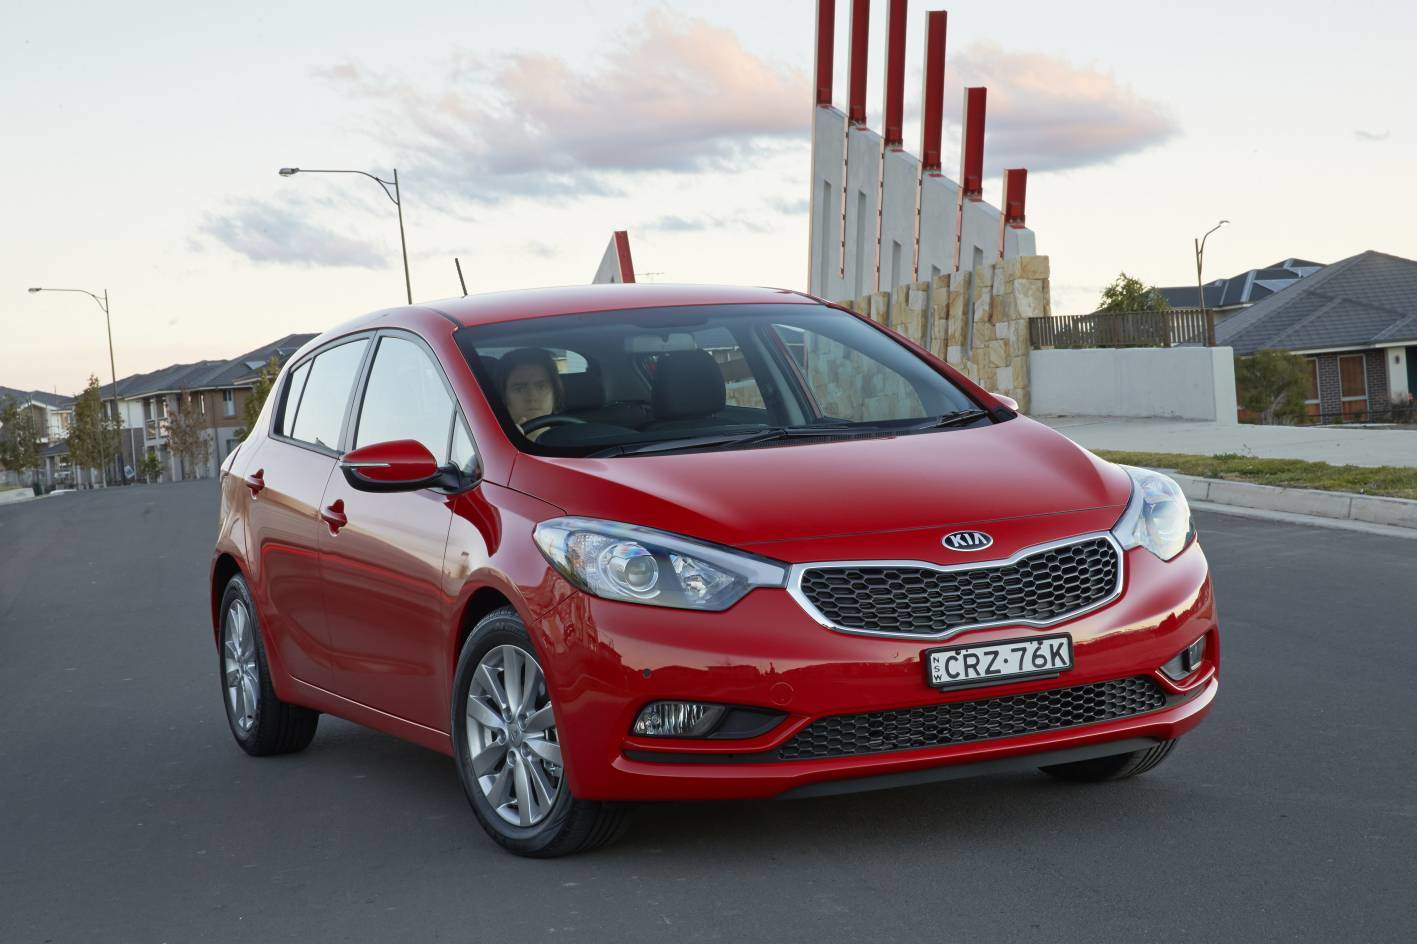 Top safety rating for new Kia Cerato